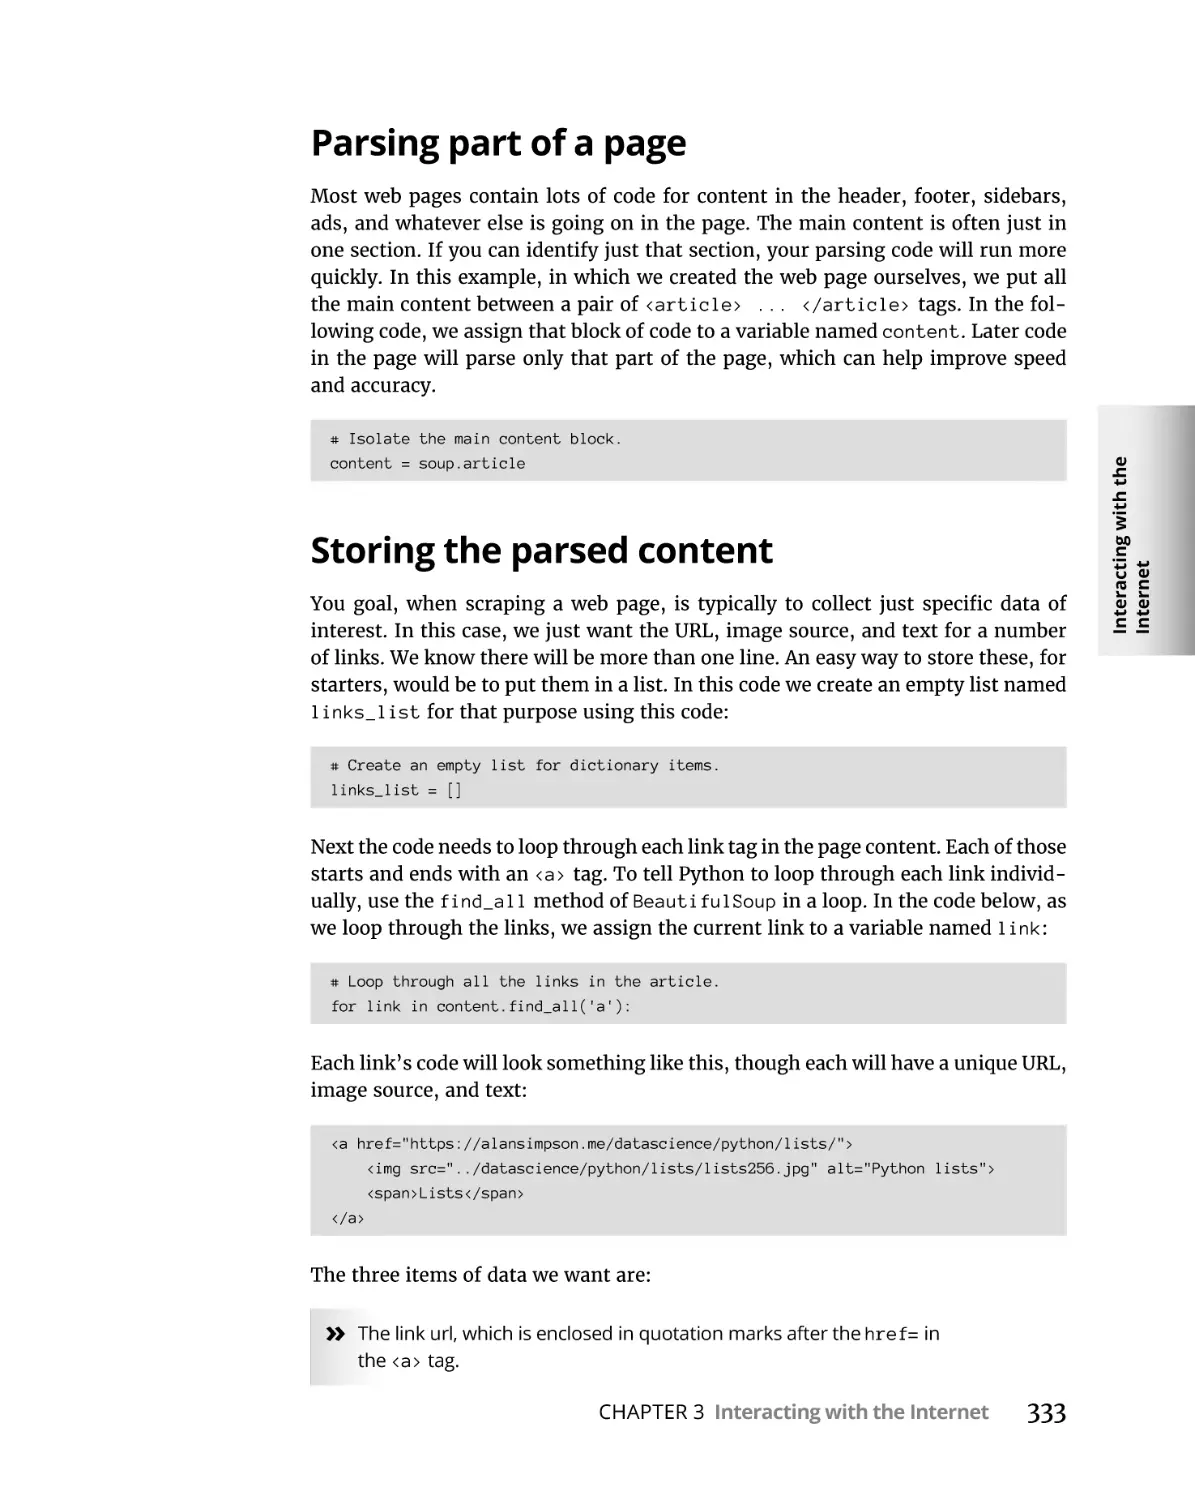 Parsing part of a page
Storing the parsed content